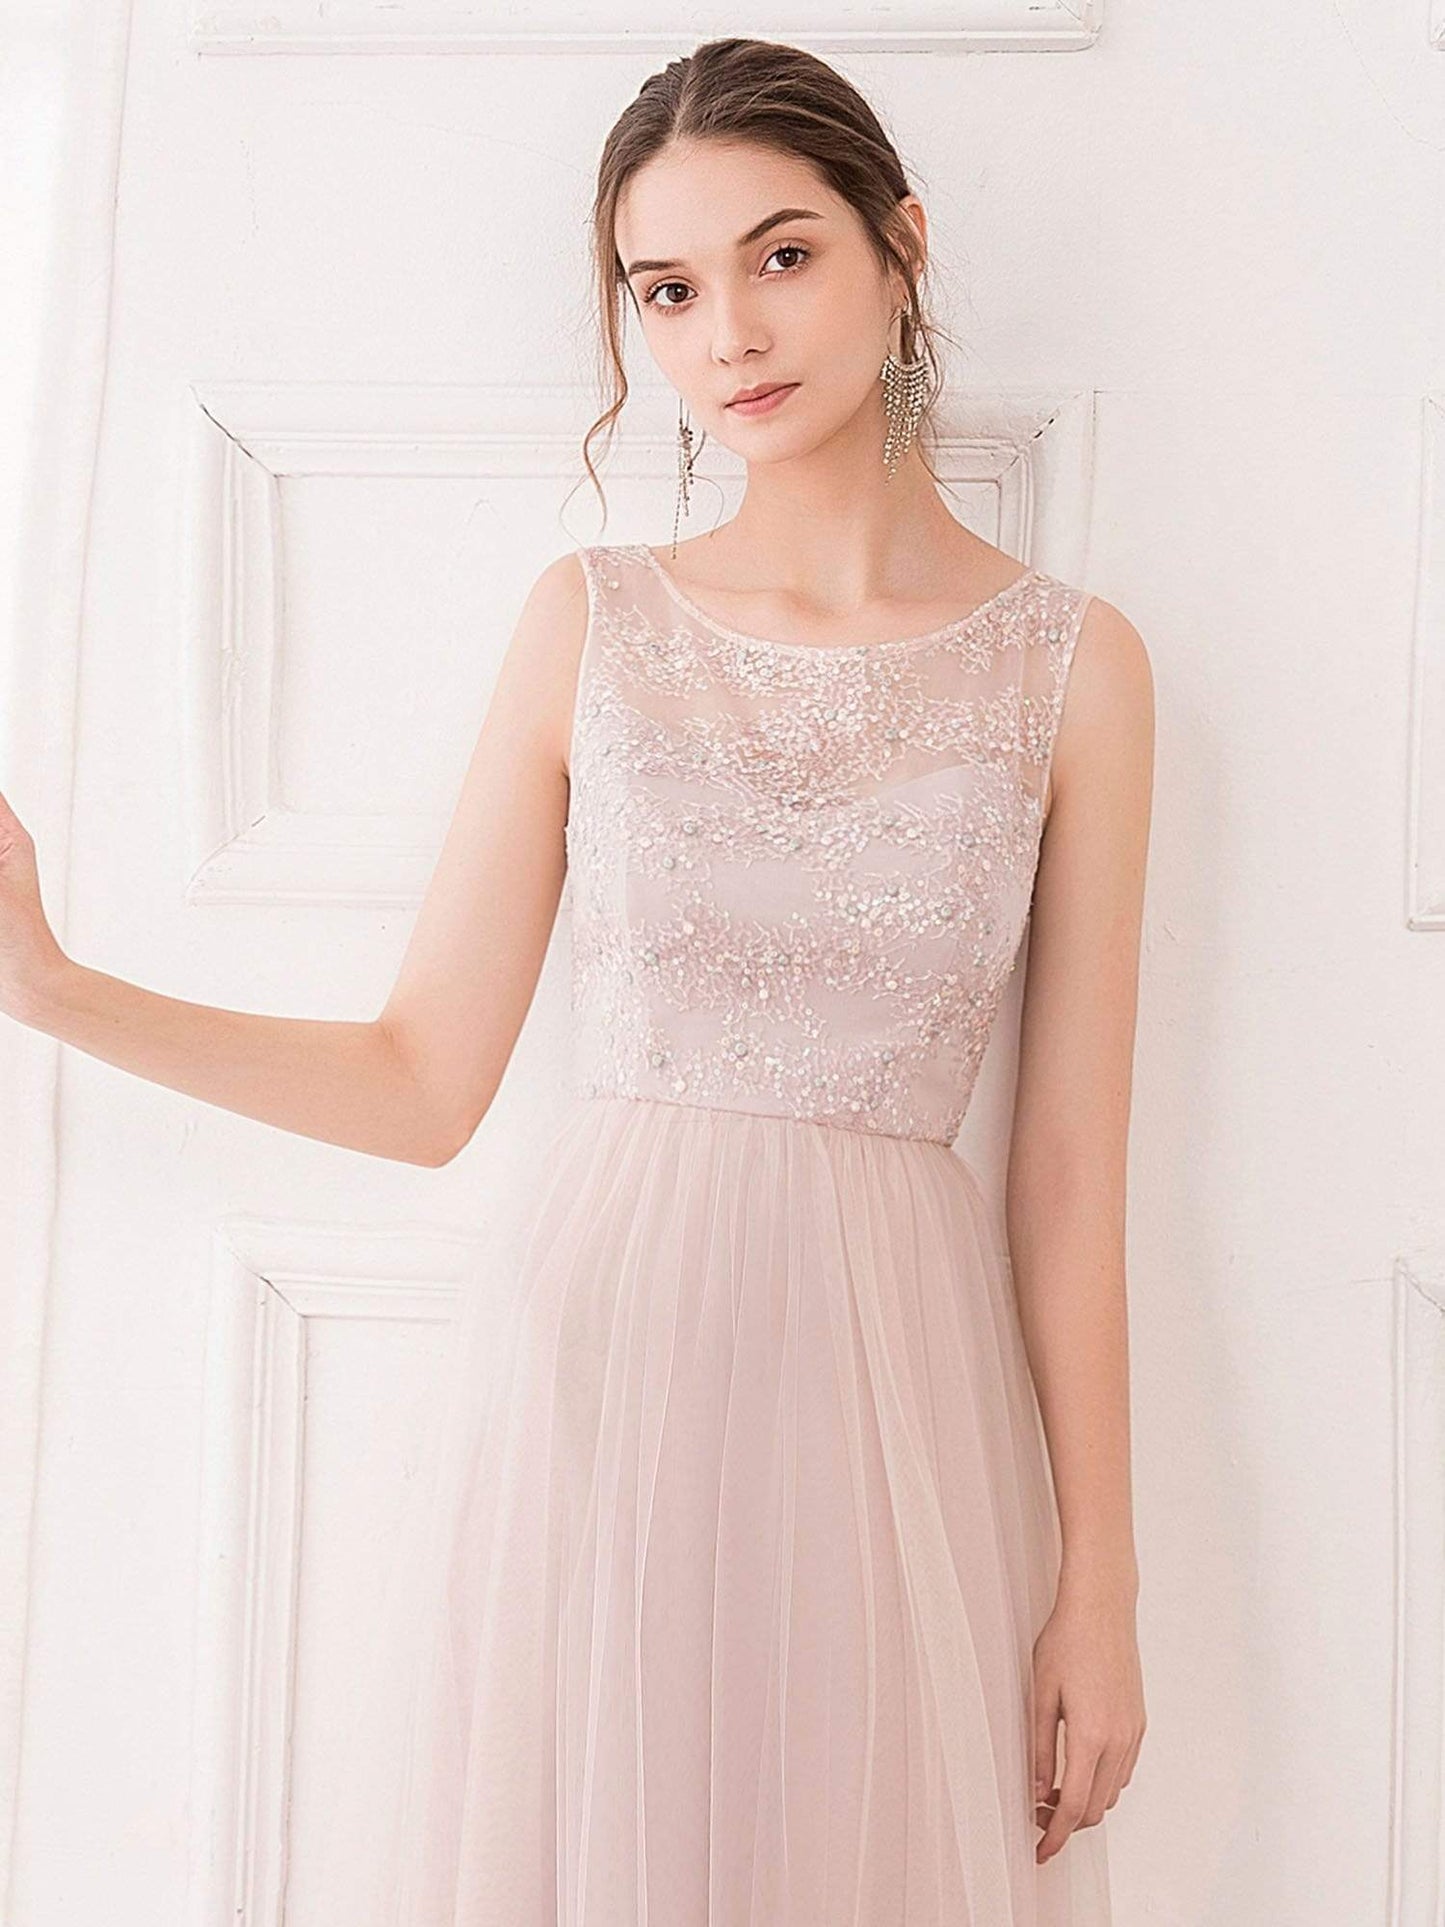 Romantic A-Line O-Neck Embroidery Tulle Bridesmaid Dress EP00740